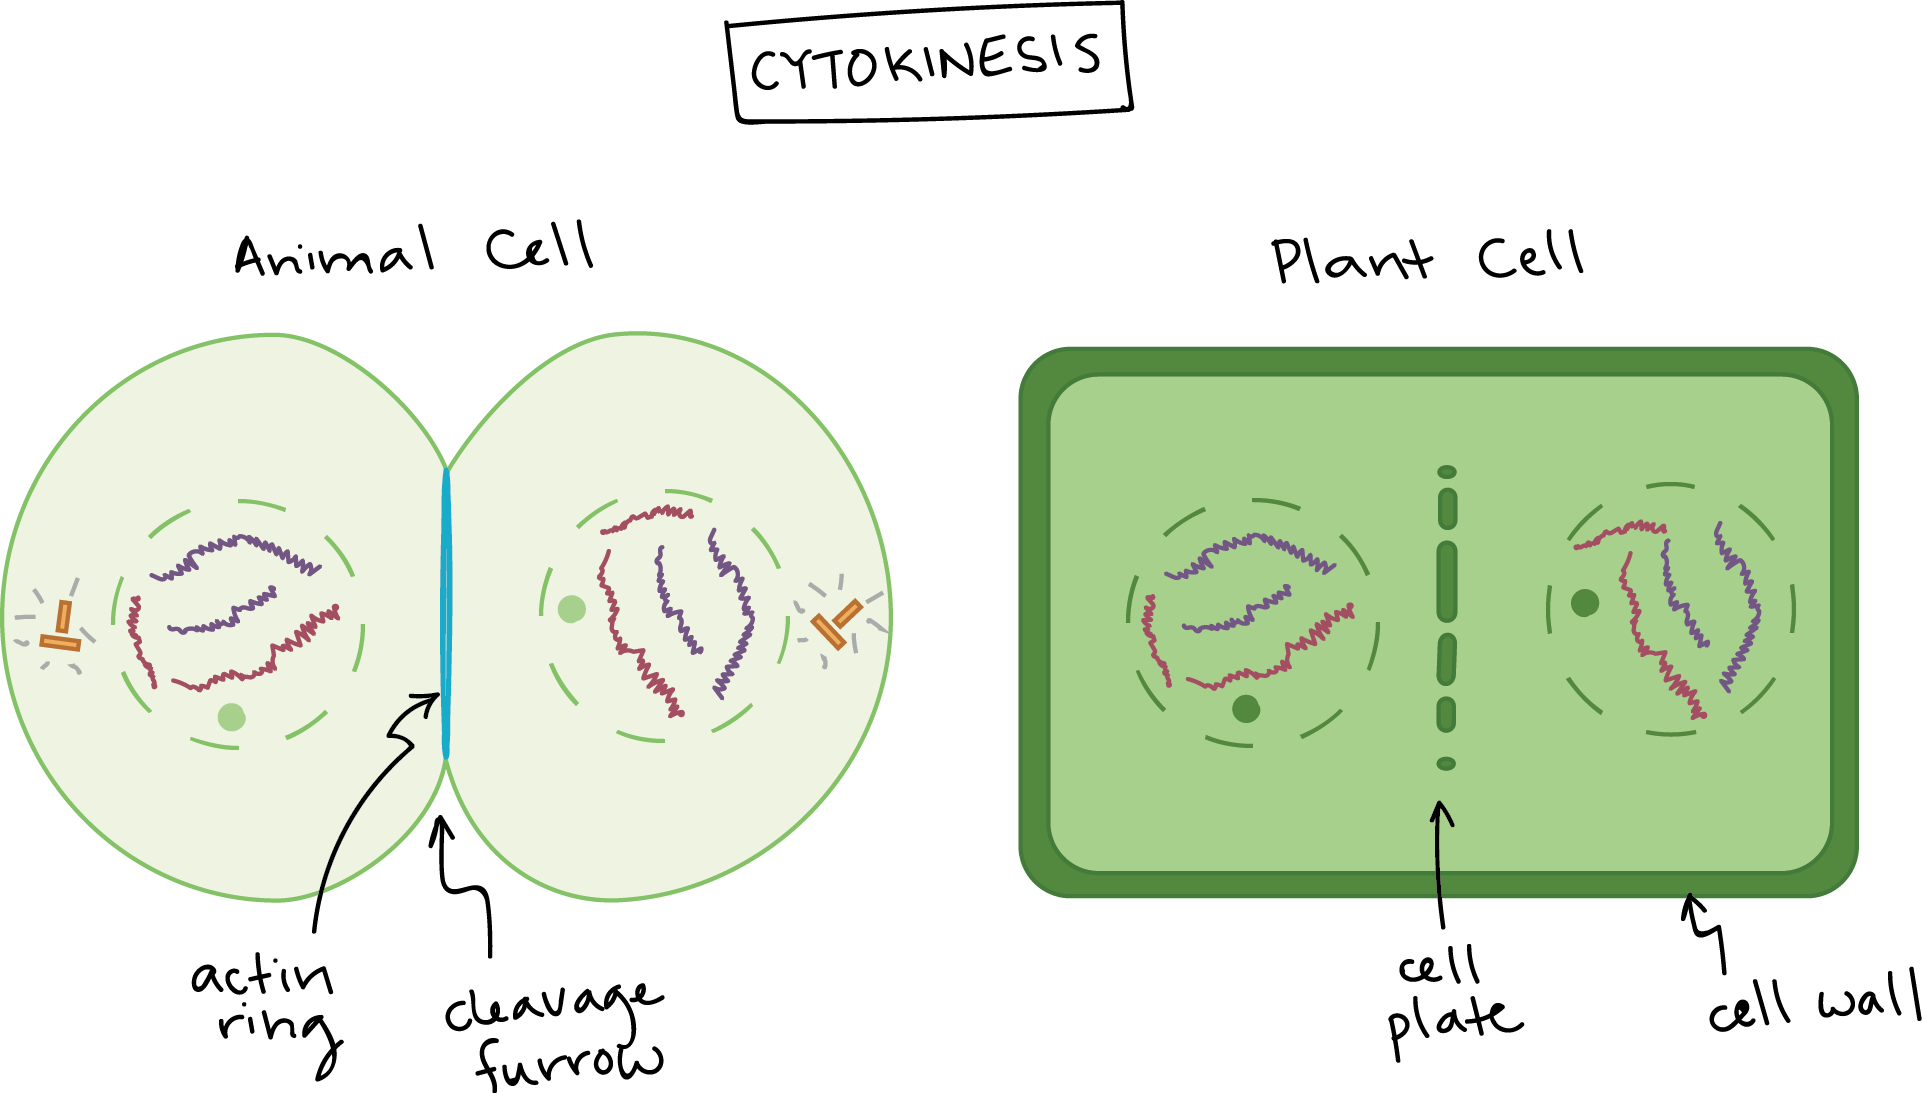 Cytokinesis in animal cells and plant cells.